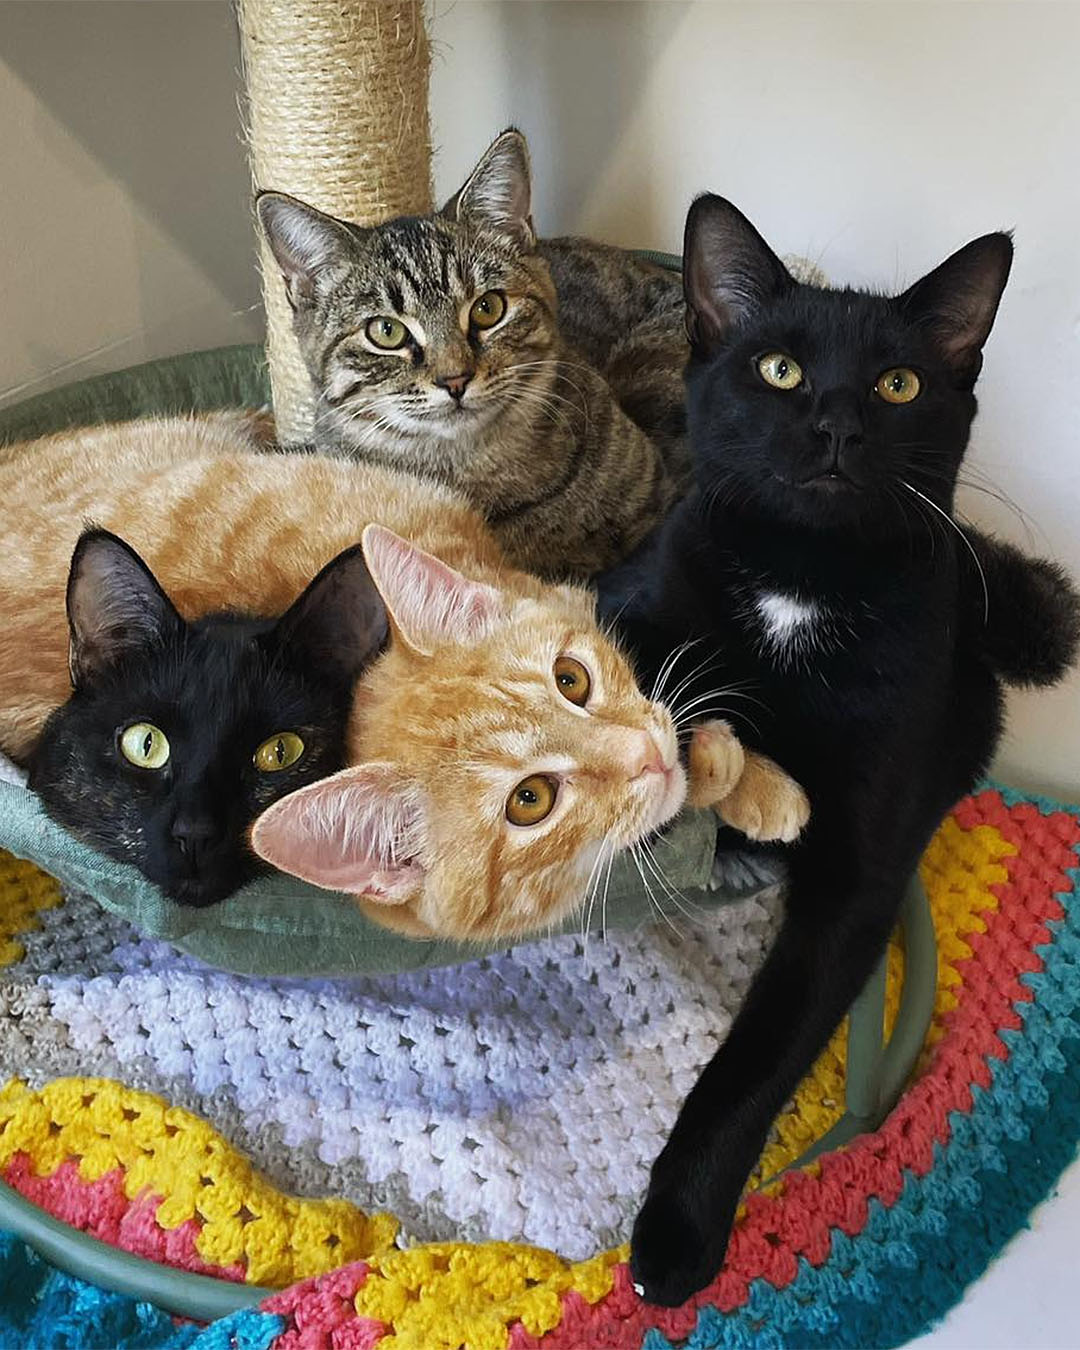 If we fits, we sits. Cats huddle extremely cutely at Purrs and Beans.